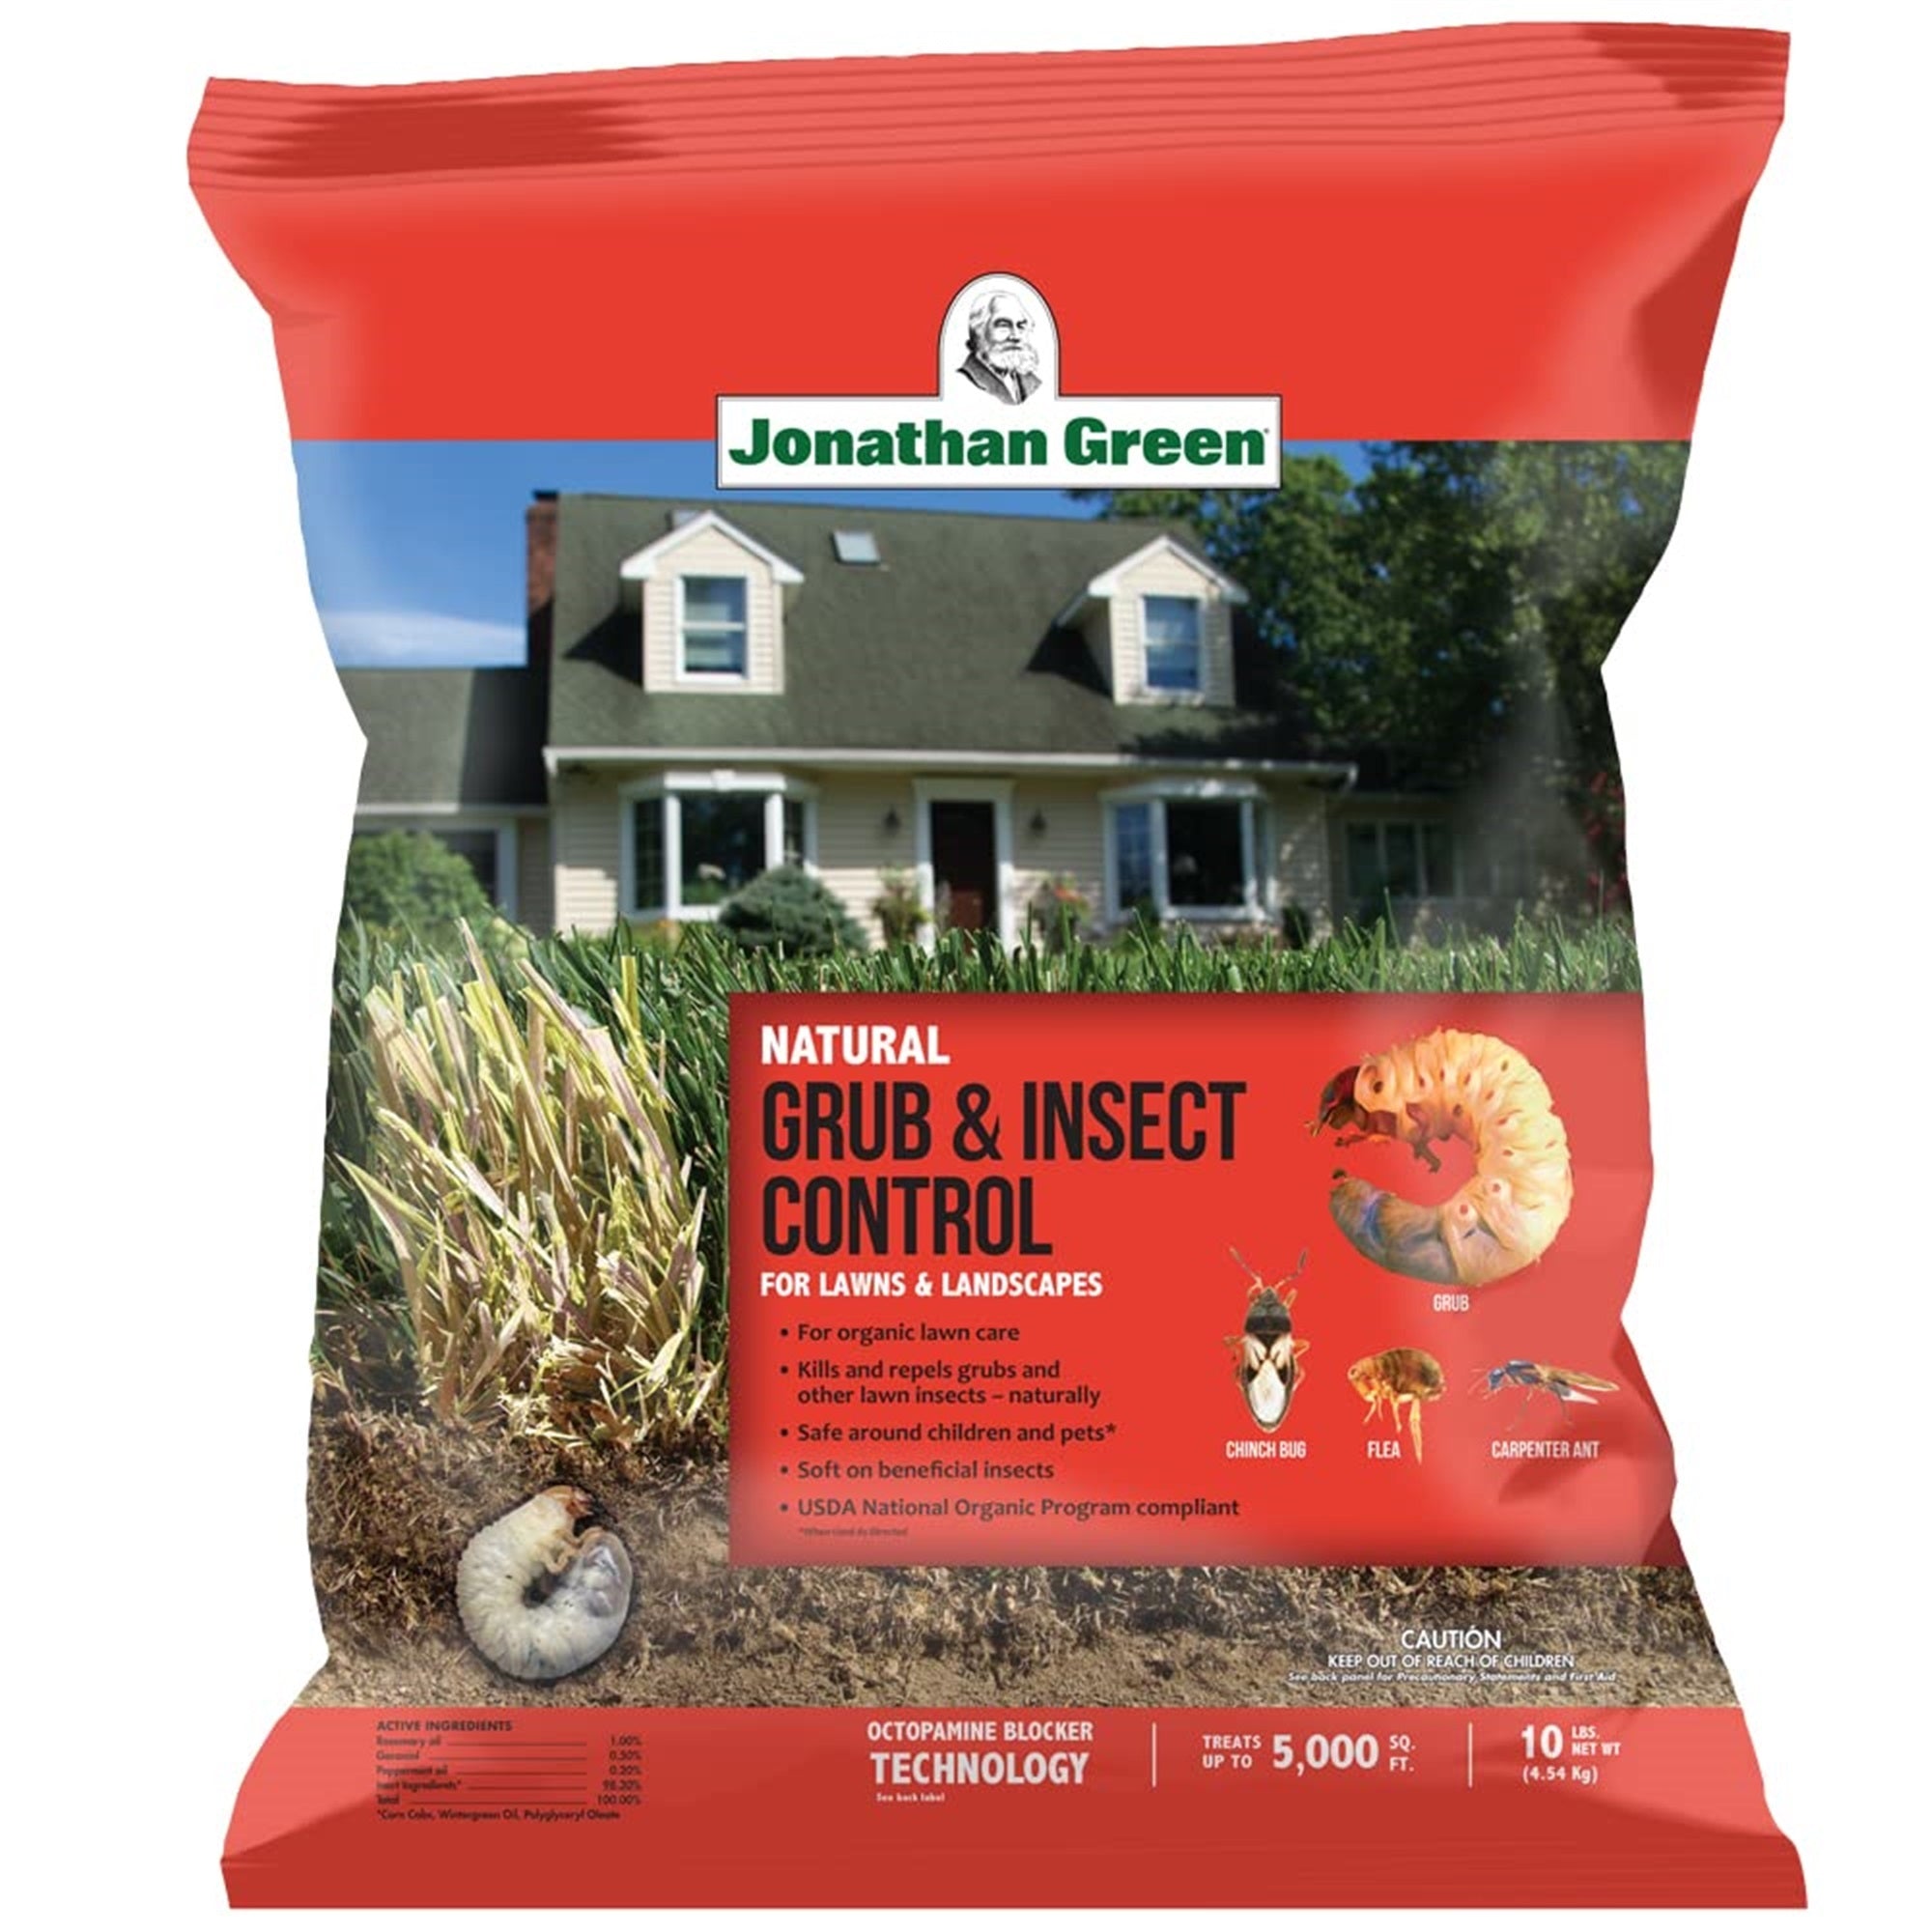 Jonathan Green Natural Grub & Insect Control for Lawns, 5M (5,000 sq ft Coverage)